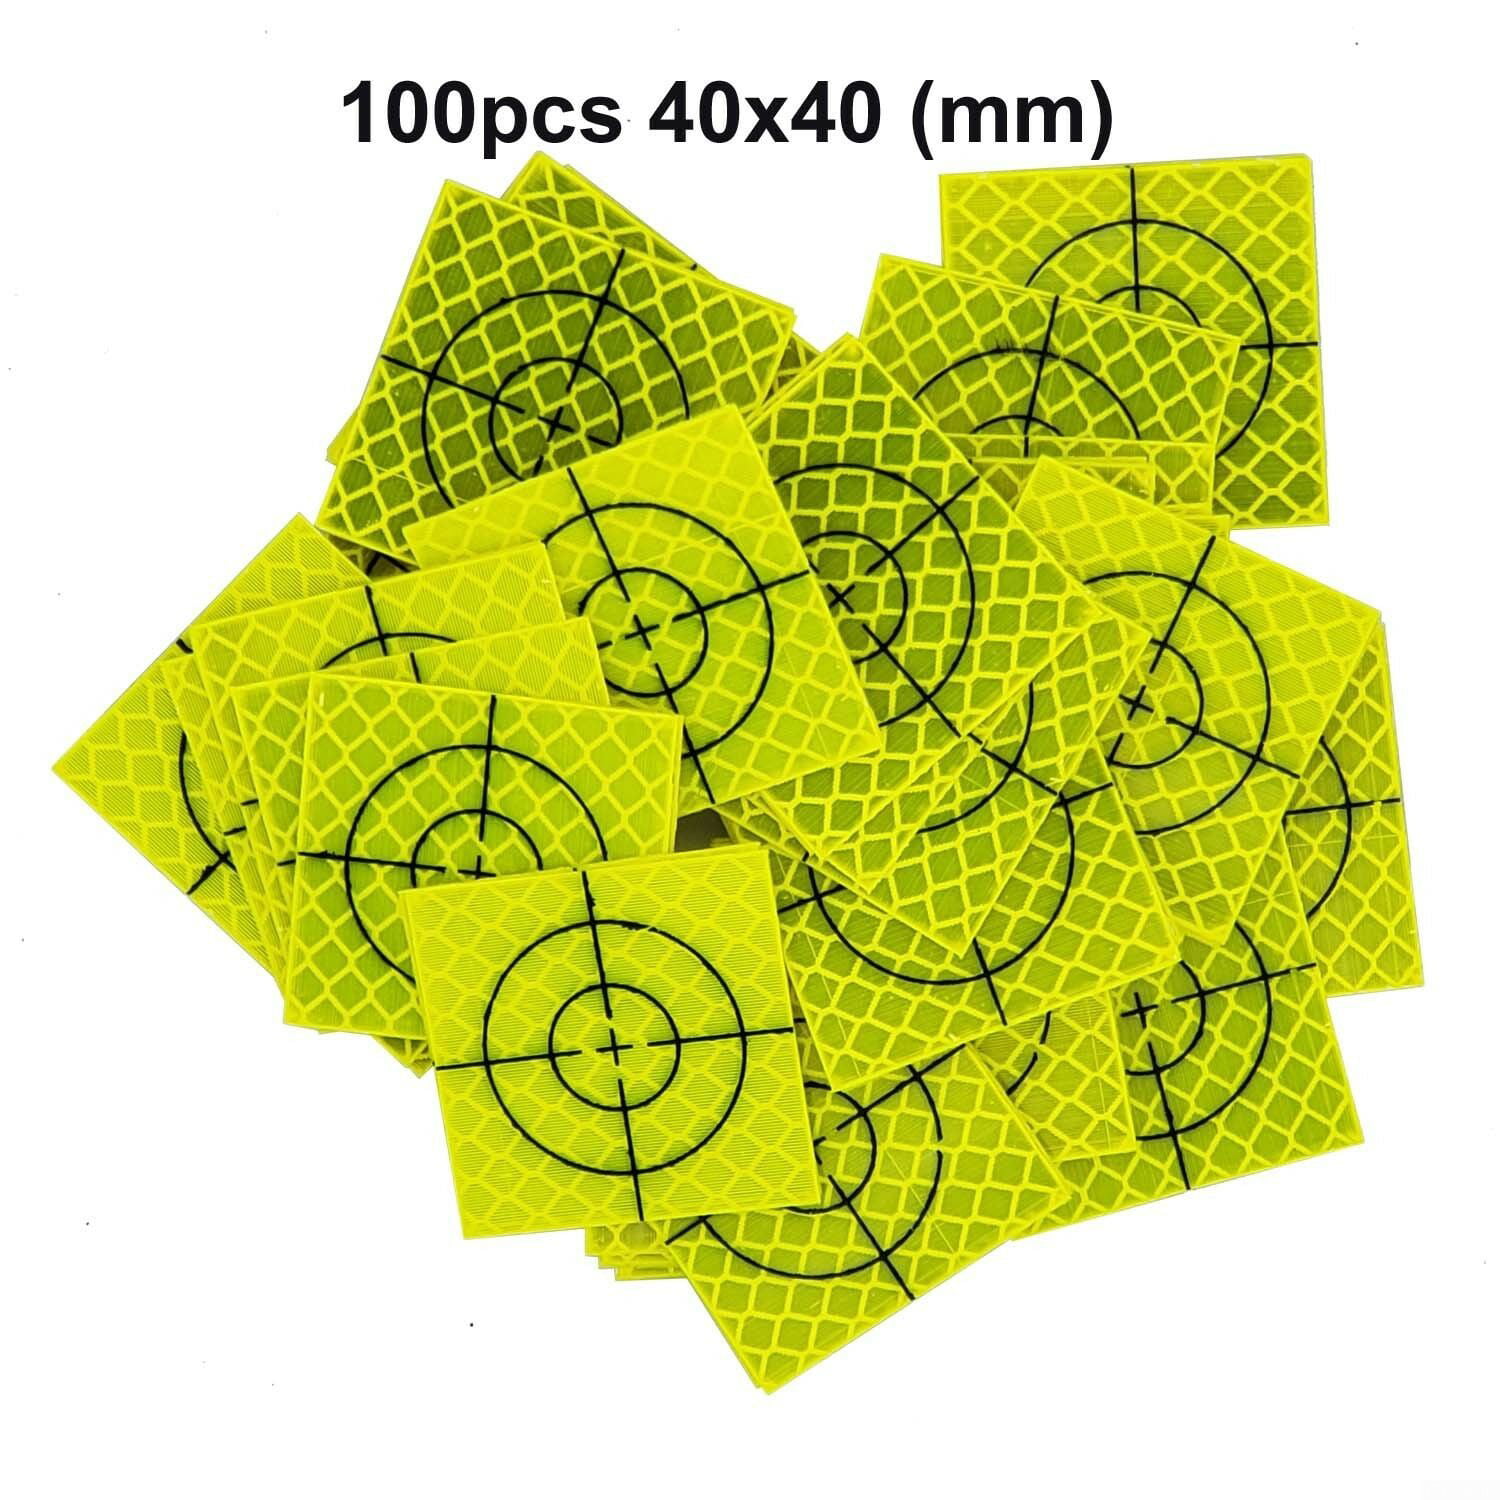 NEW 100PCS YELLOW REFLECTOR SHEET 60X60MM REFLECTIVE TARGET FOR TOTAL STATION 